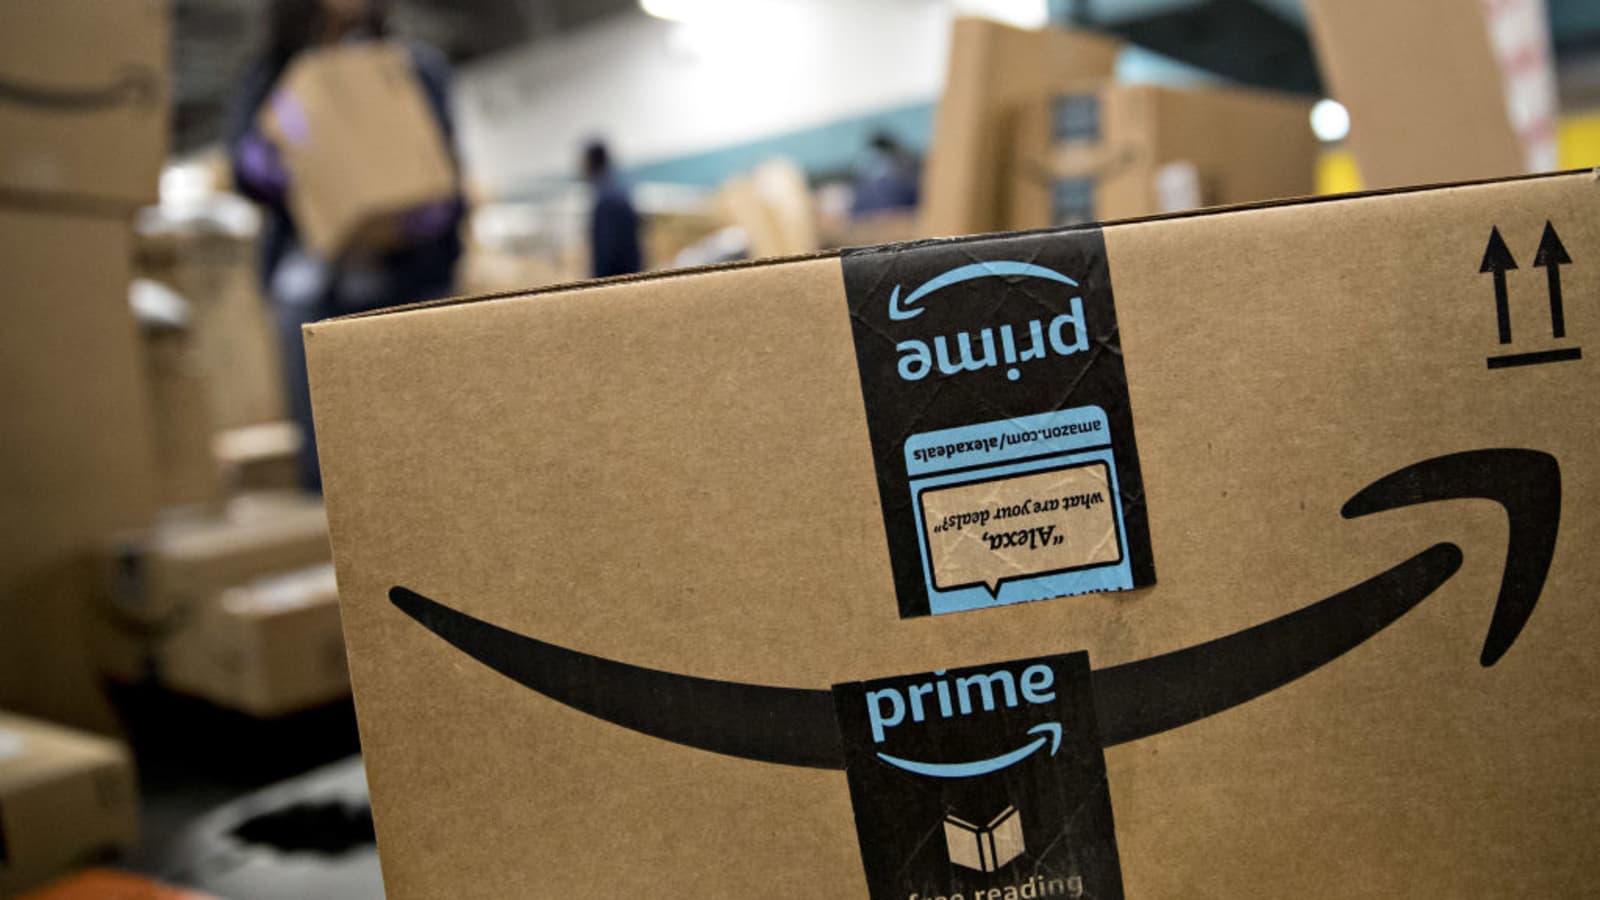 Retailers Hope Amazon S Prime Day On Tuesday Kicks Off Early Holiday Shopping Season - amazoncom roblox series 3 speed runner action figure